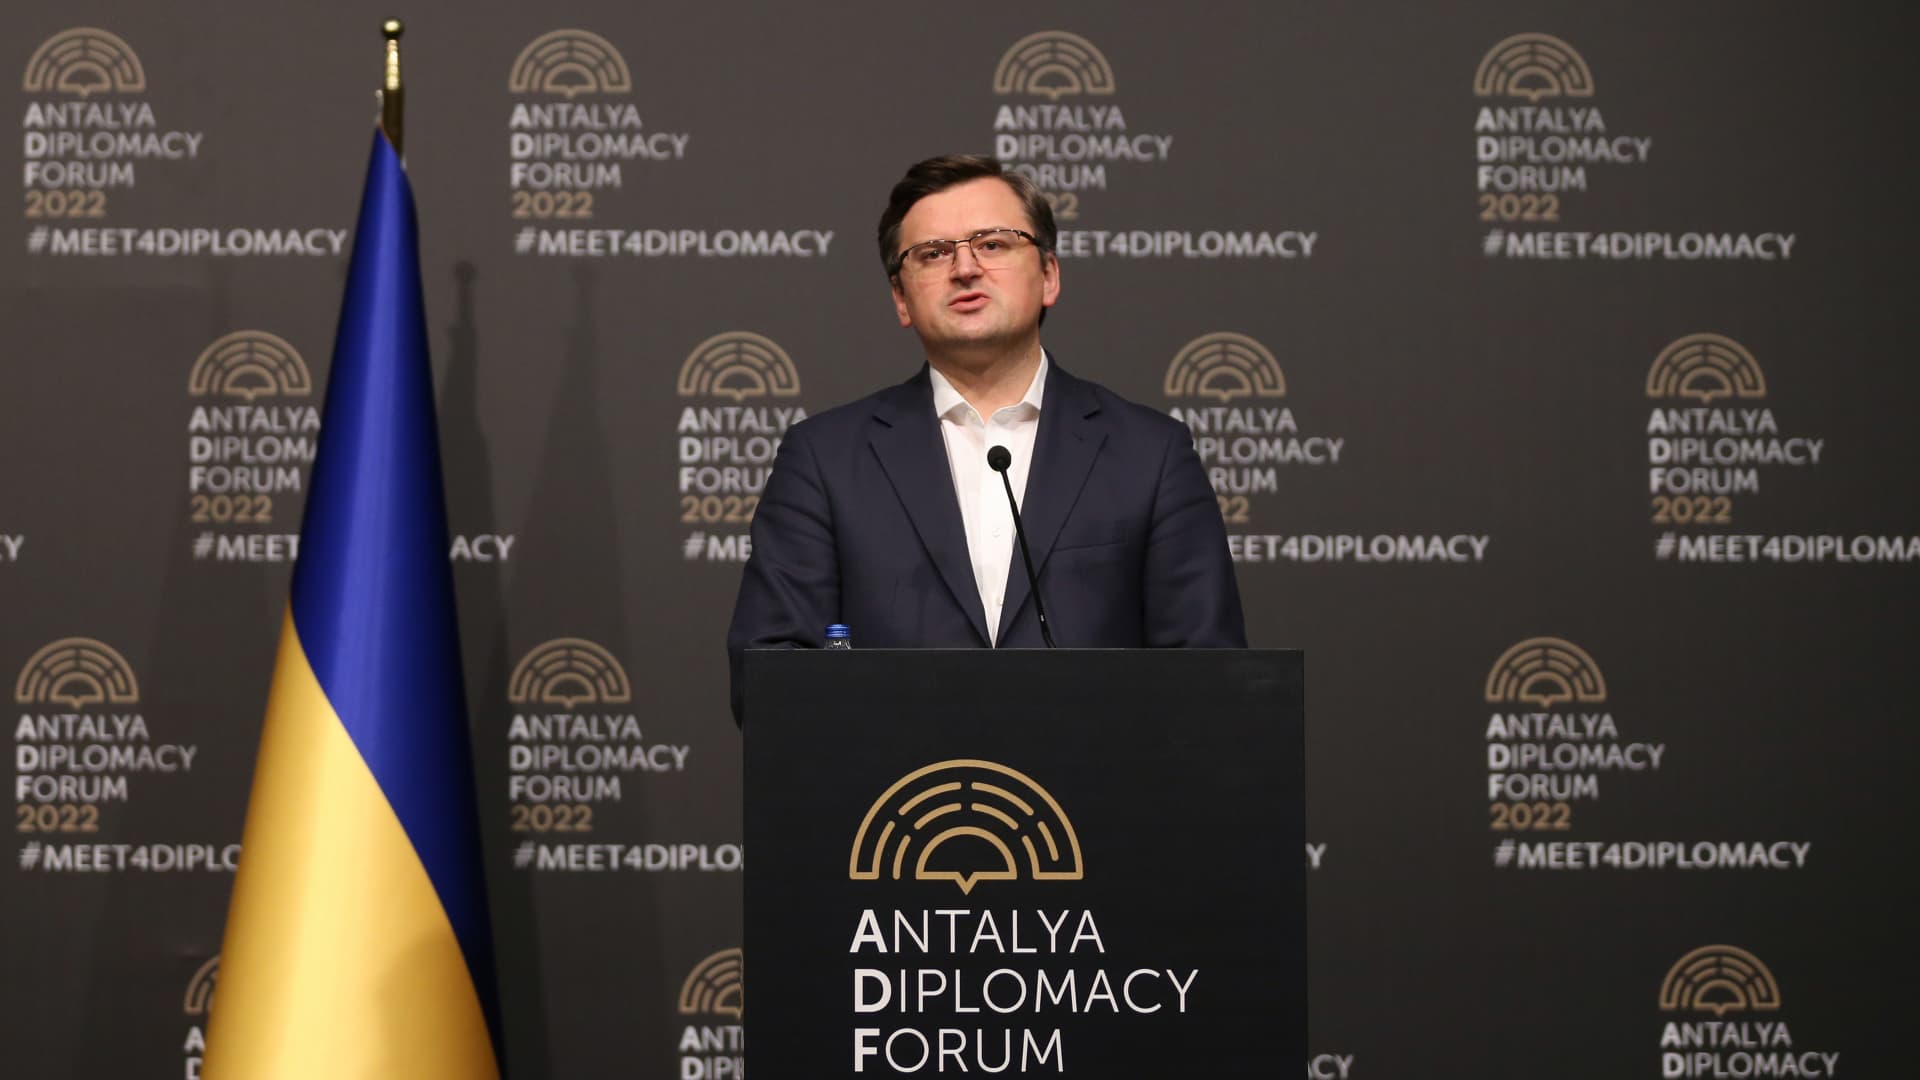 Ukraine's Foreign Minister Dmytro Kuleba holds a press conference after the Russia-Turkiye-Ukraine tripartite Foreign Ministers meeting in Antalya, Turkiye on March 10, 2022.